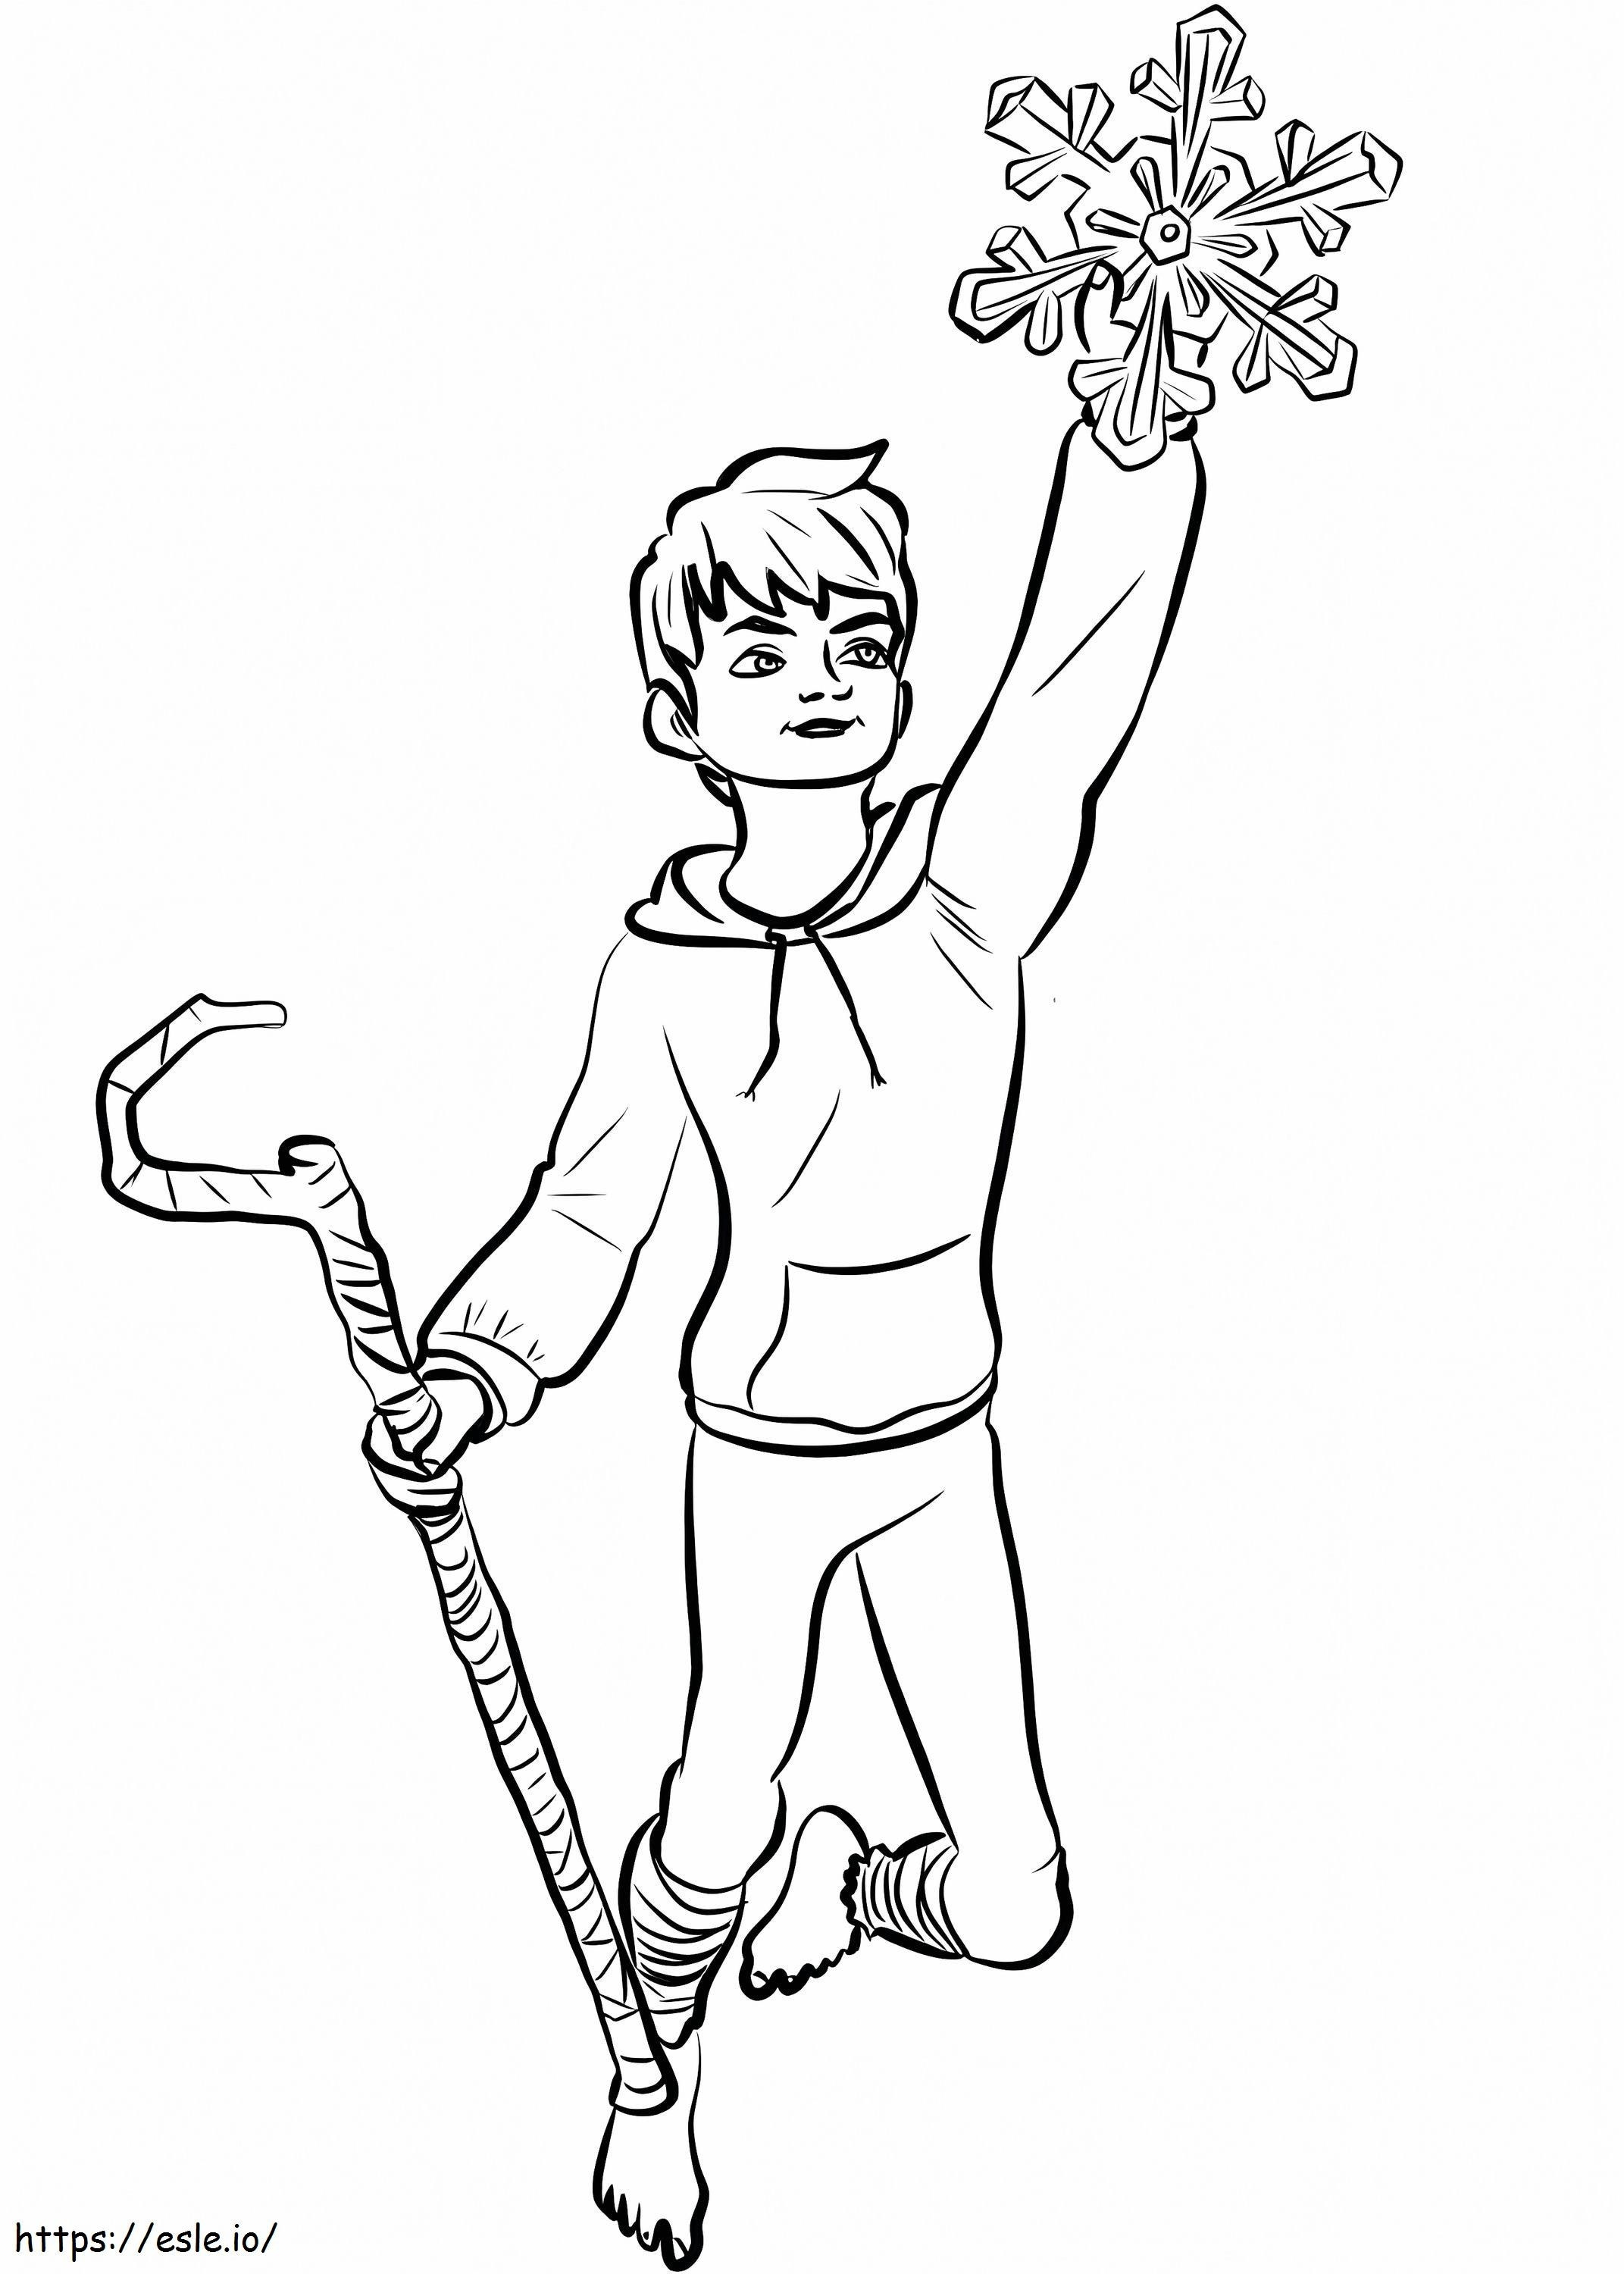 Awesome Jack Frost coloring page